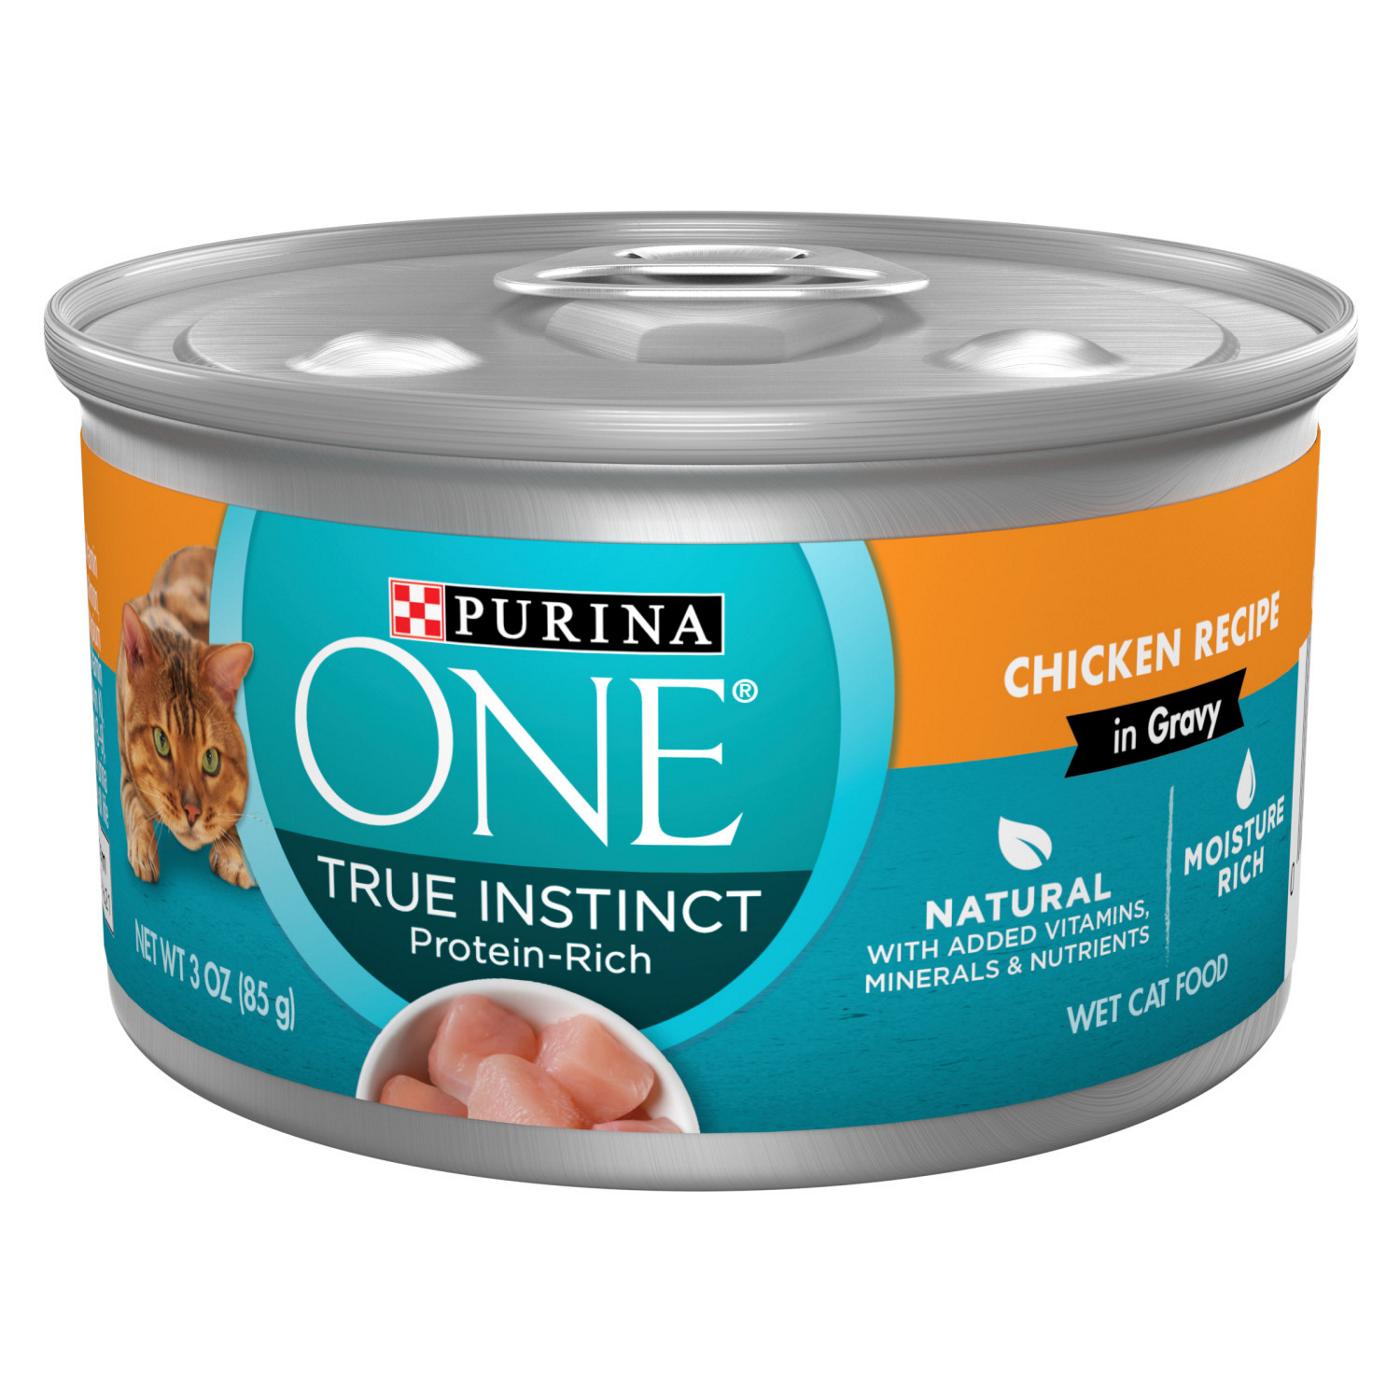 Purina ONE Purina ONE Natural High Protein Cat Food, True Instinct Chicken Recipe in Gravy; image 1 of 6